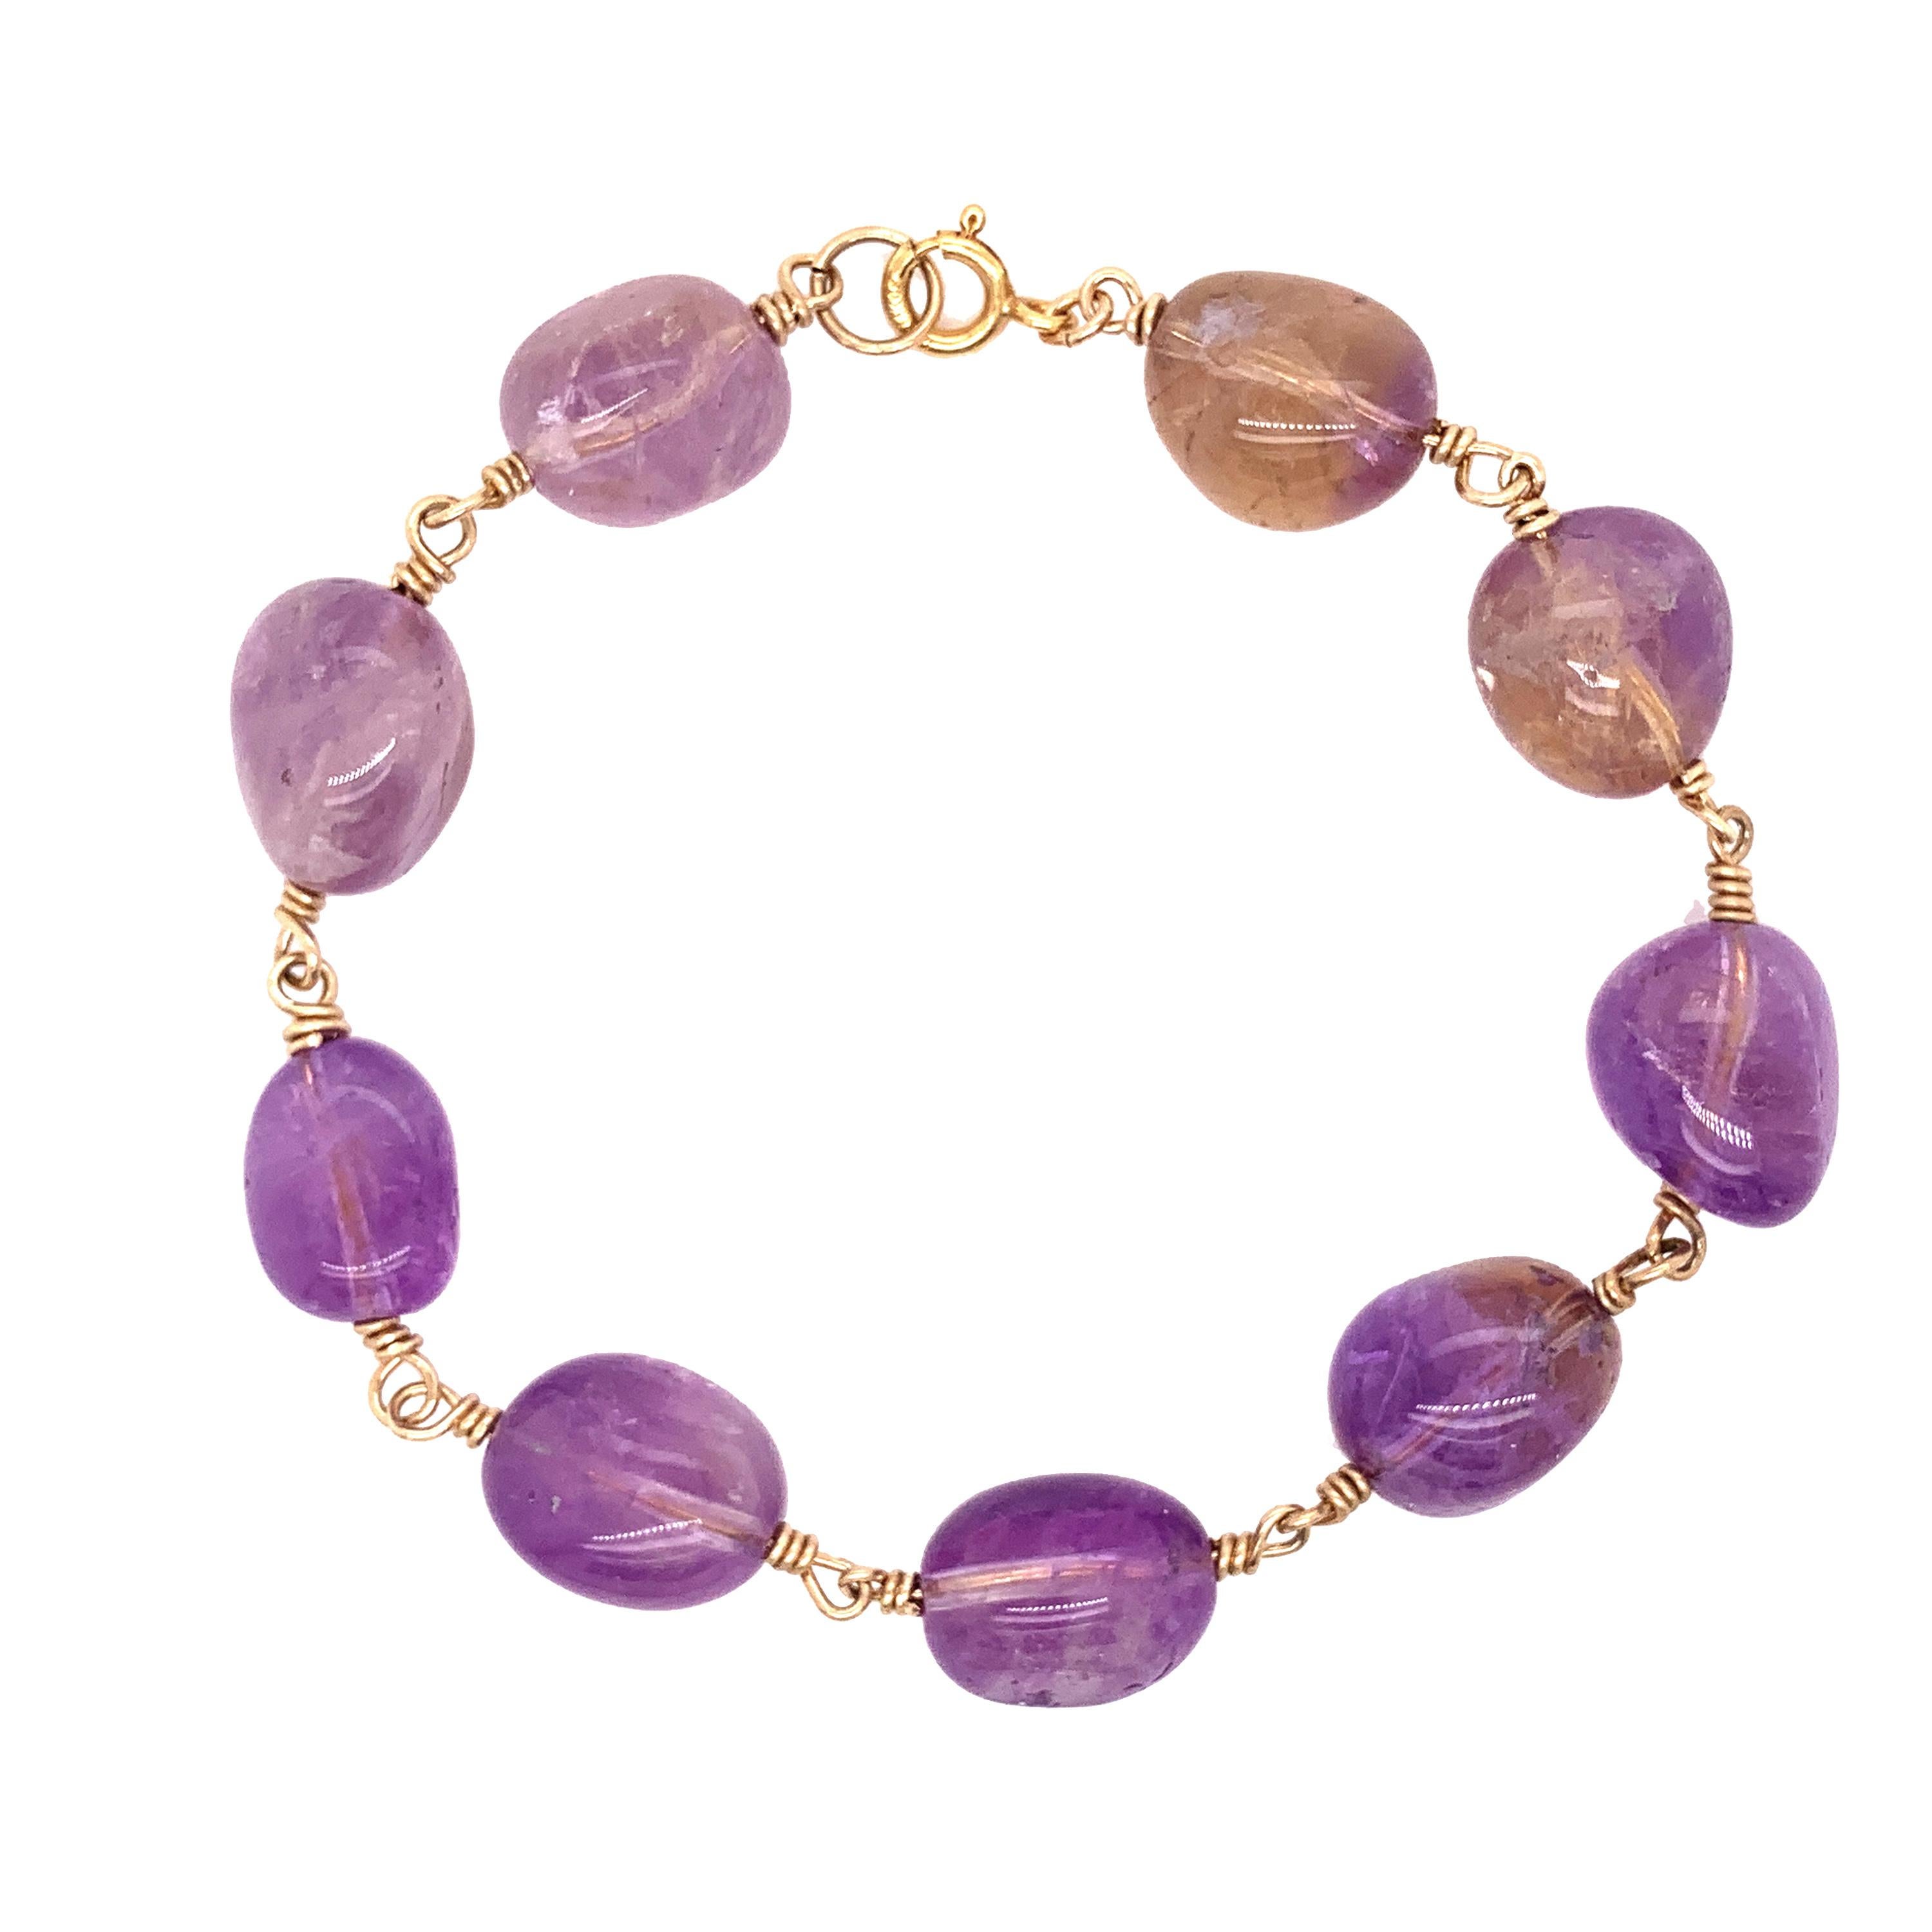 Smooth Ametrine beads in colors of purples and hints of yellows make up this bracelet with 14K gold fill wire and 14K gold fill spring ring closure.

These beads measure around 3/4